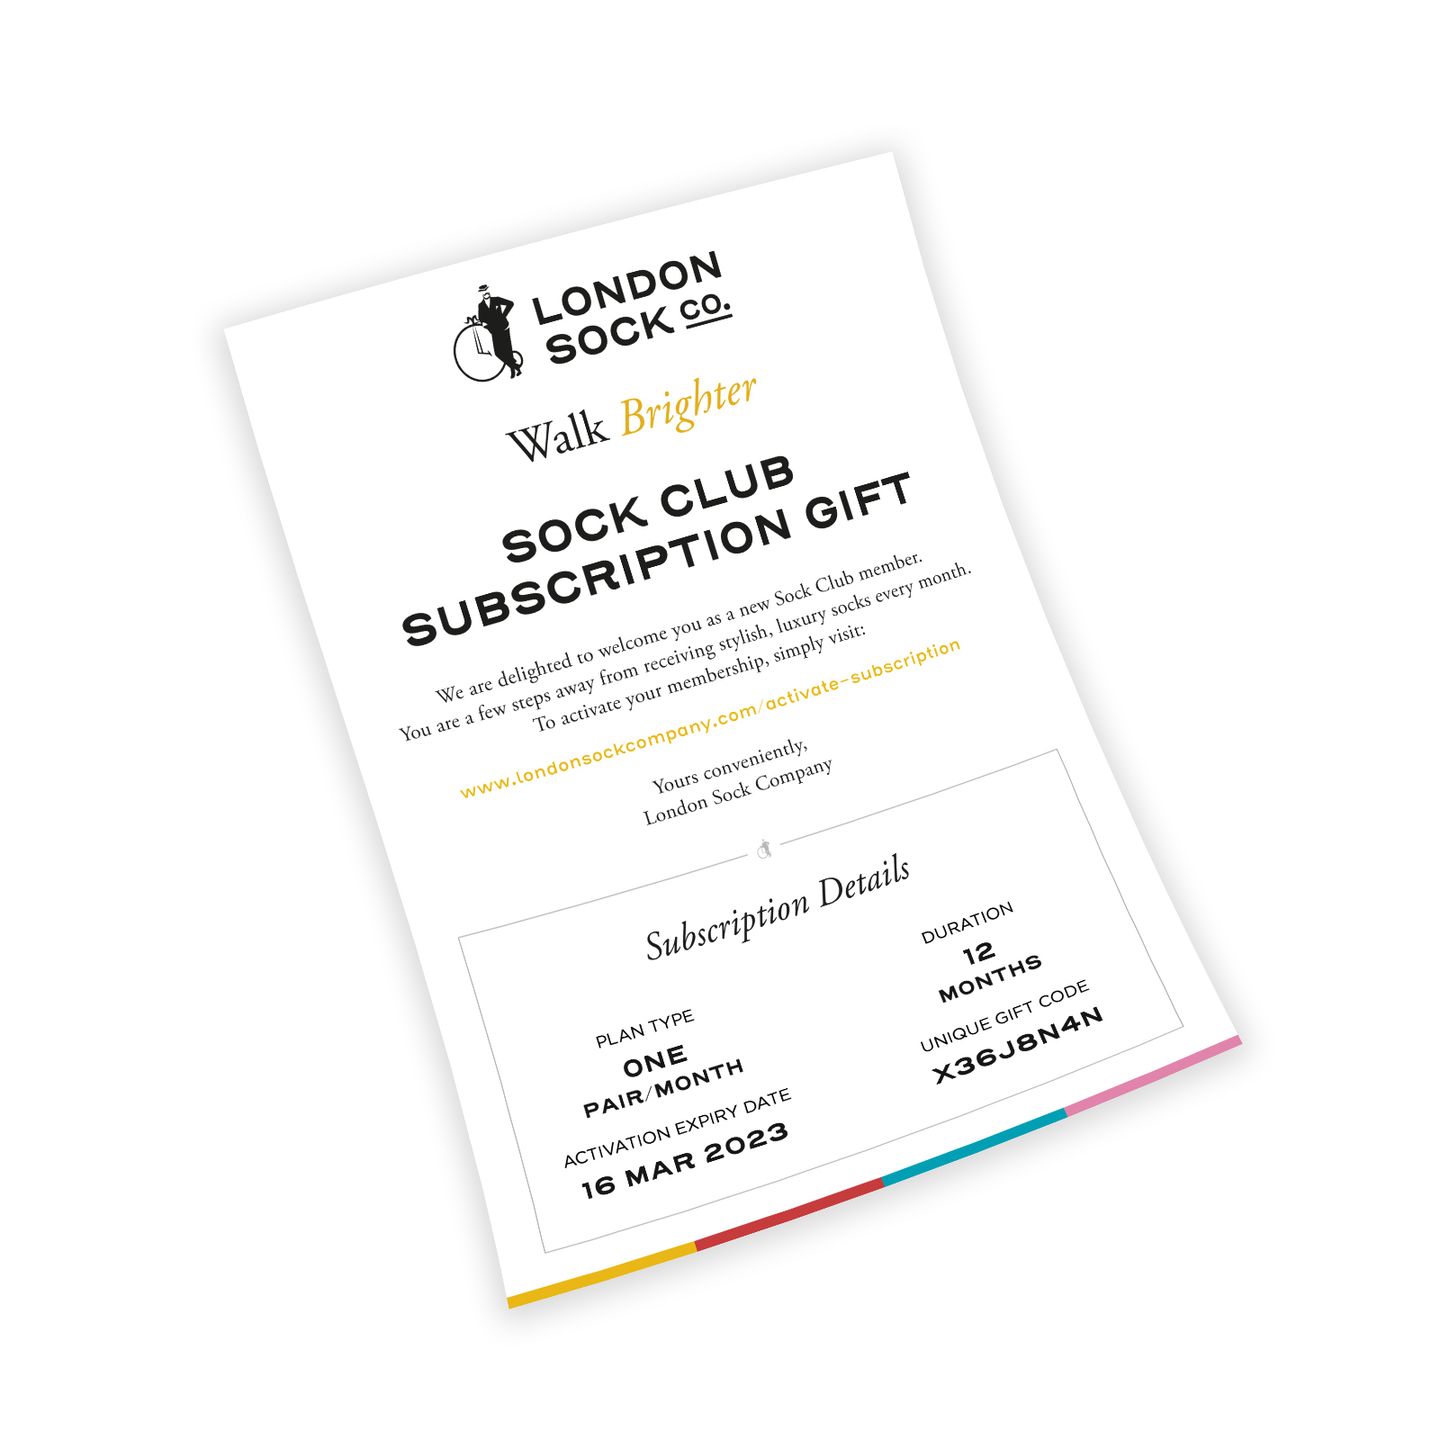 Sock club subscription with plan details and duration